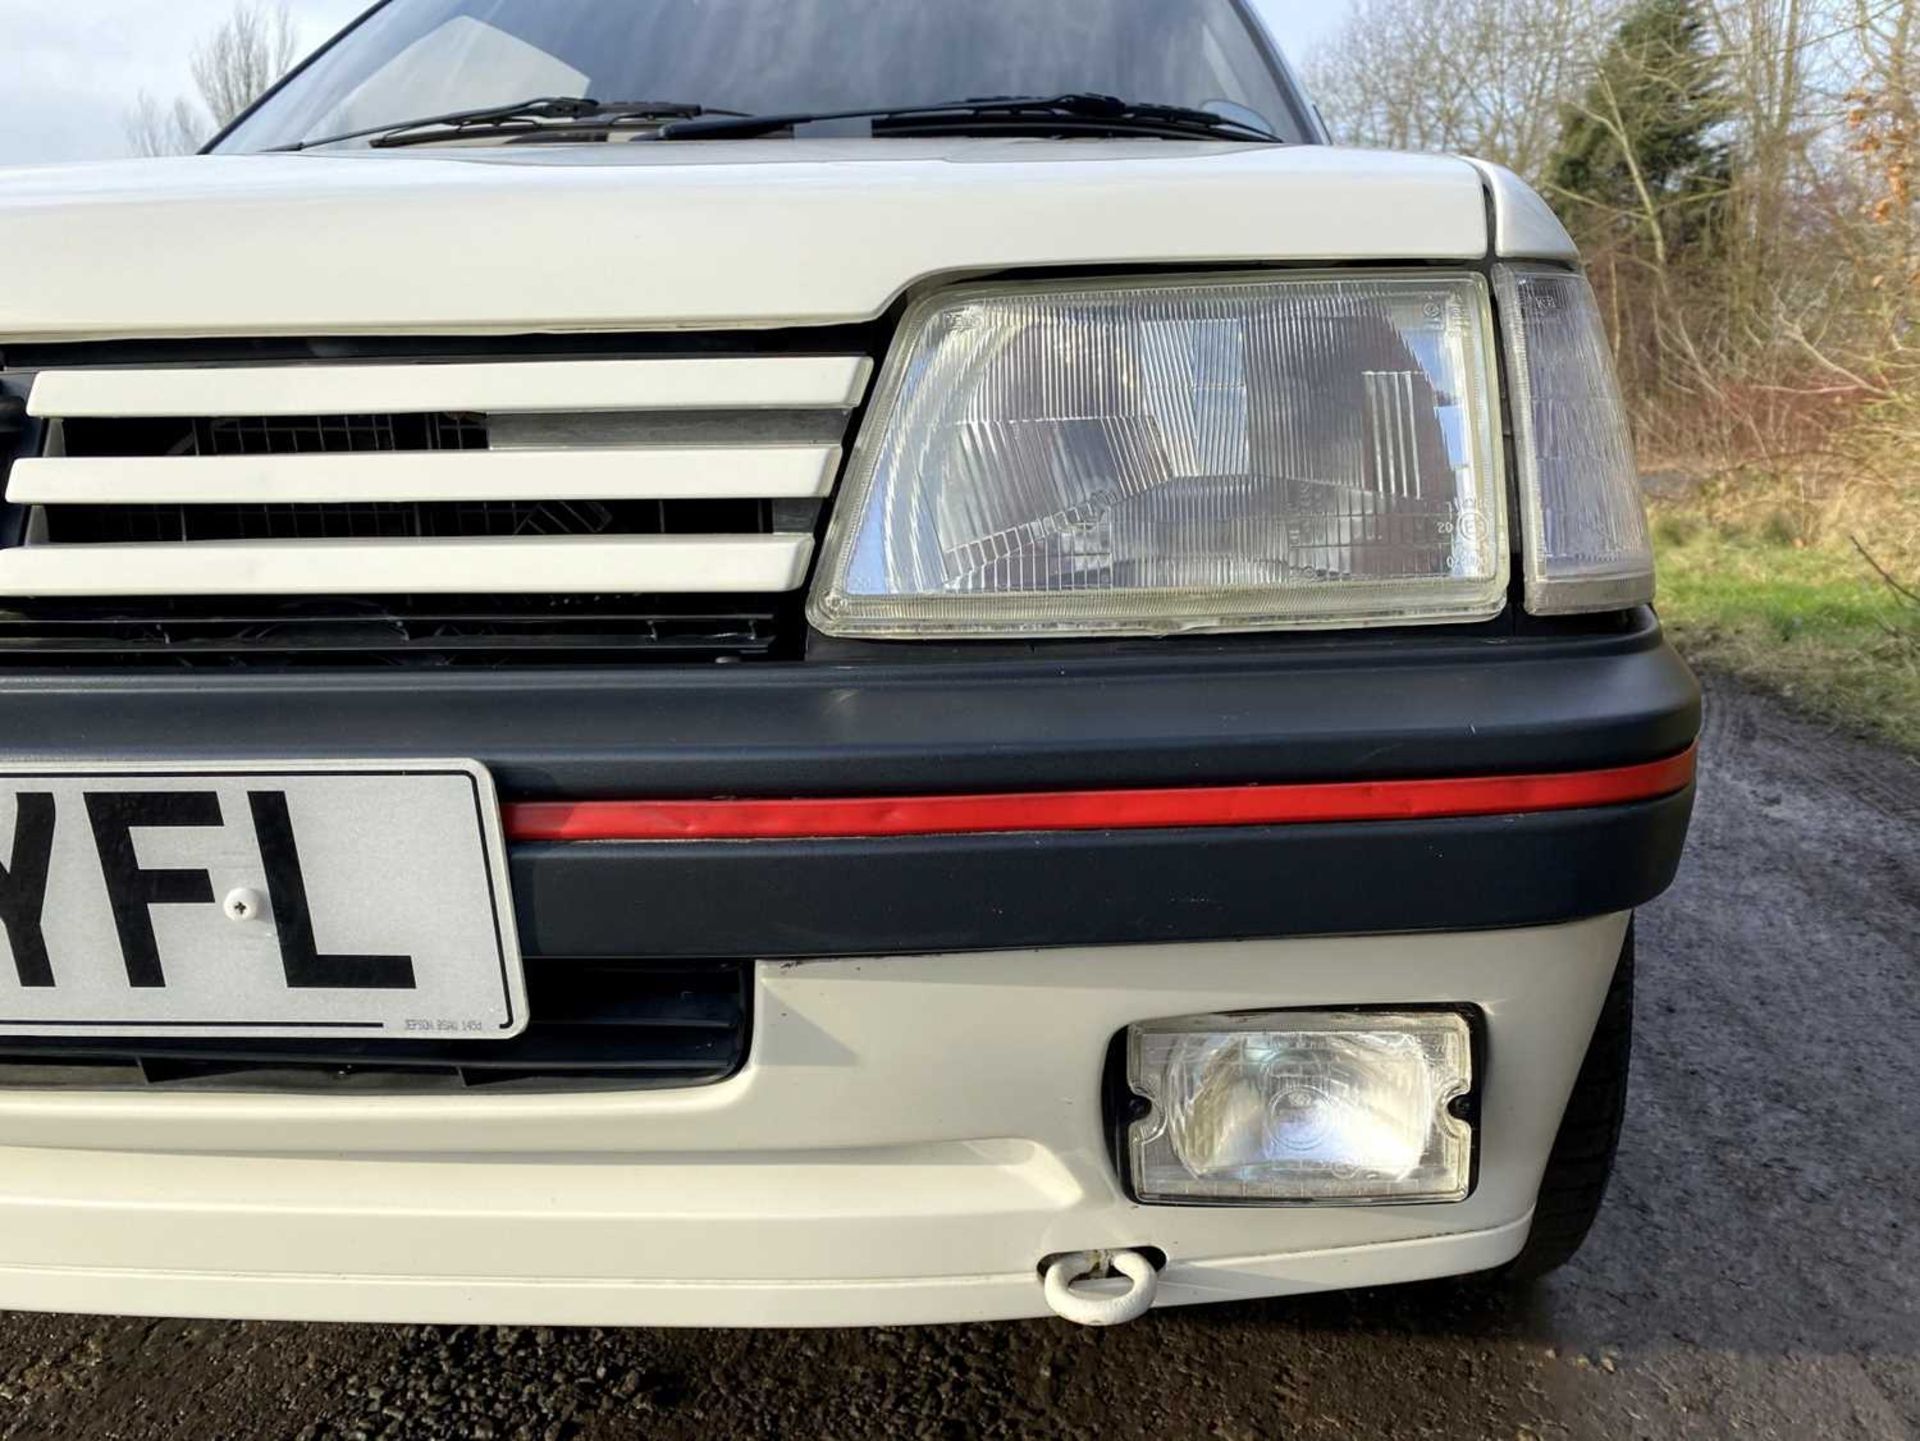 1990 Peugeot 205 GTi 1.6 Only 56,000 miles, same owner for 16 years - Image 54 of 81